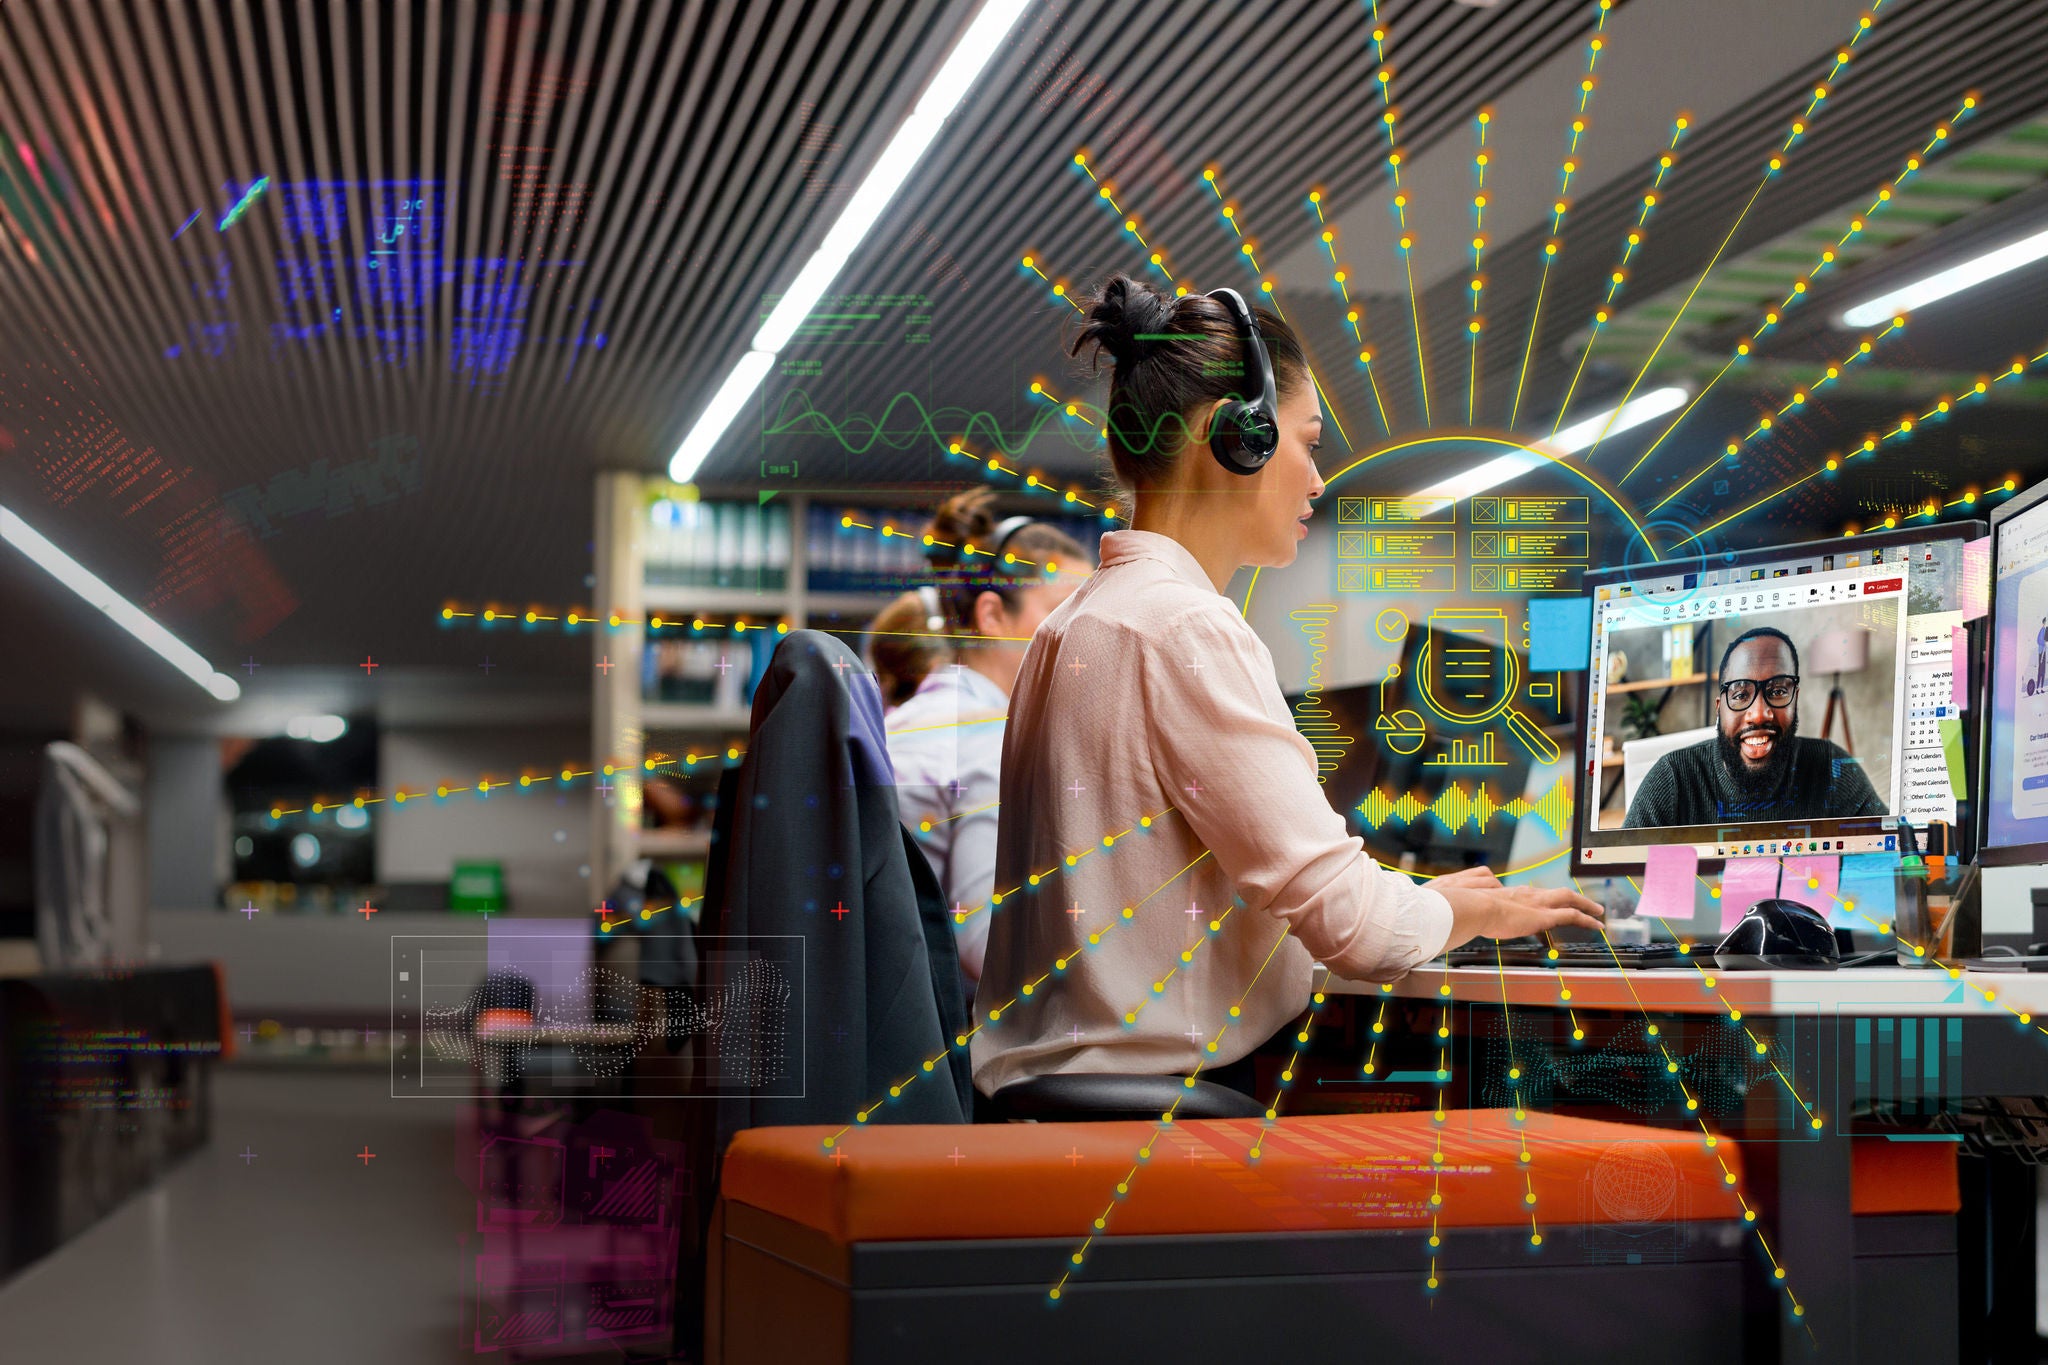 Group of customer service representatives working at a call center using headsets and their computers. image on screen of customer is Adobe Stock 359417856